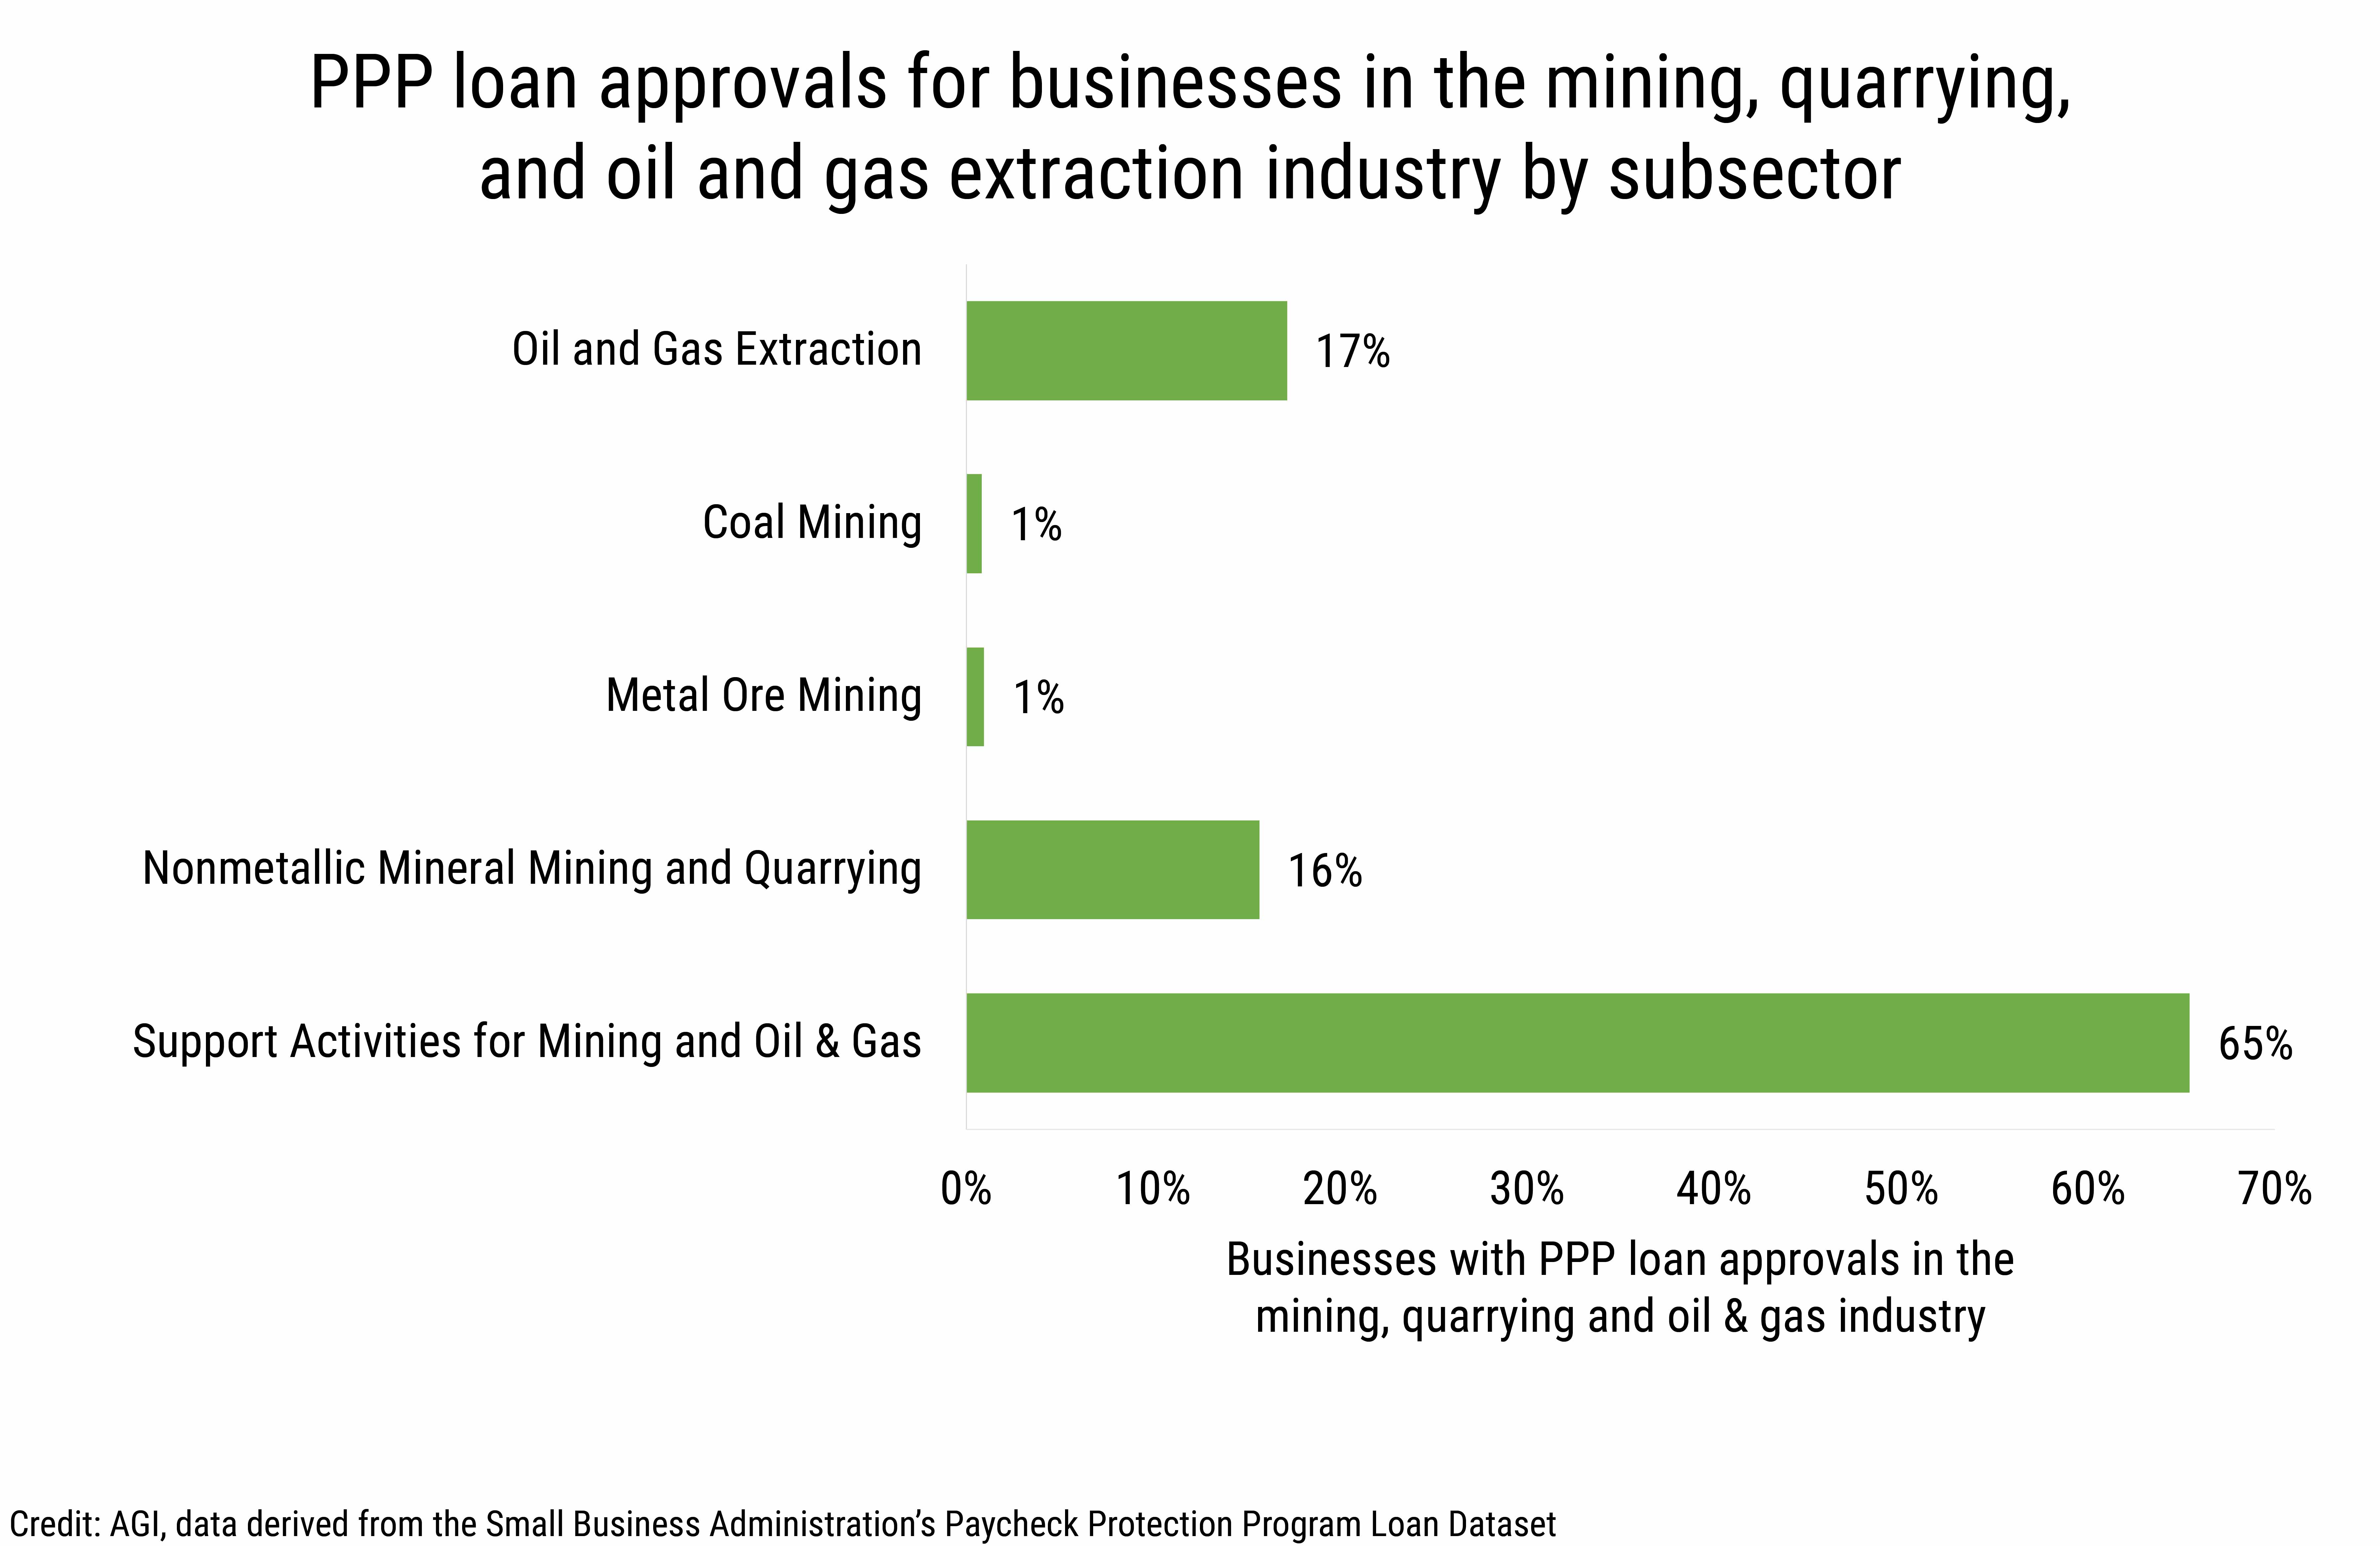 DB_2020-017 chart 01: PPP loan approvals for businesses in the mining, quarrying, and oil and gas extraction industry by subsector. (credit: AGI, data derived from the SBA&#039;s Paycheck Protection Program Loan Dataset)